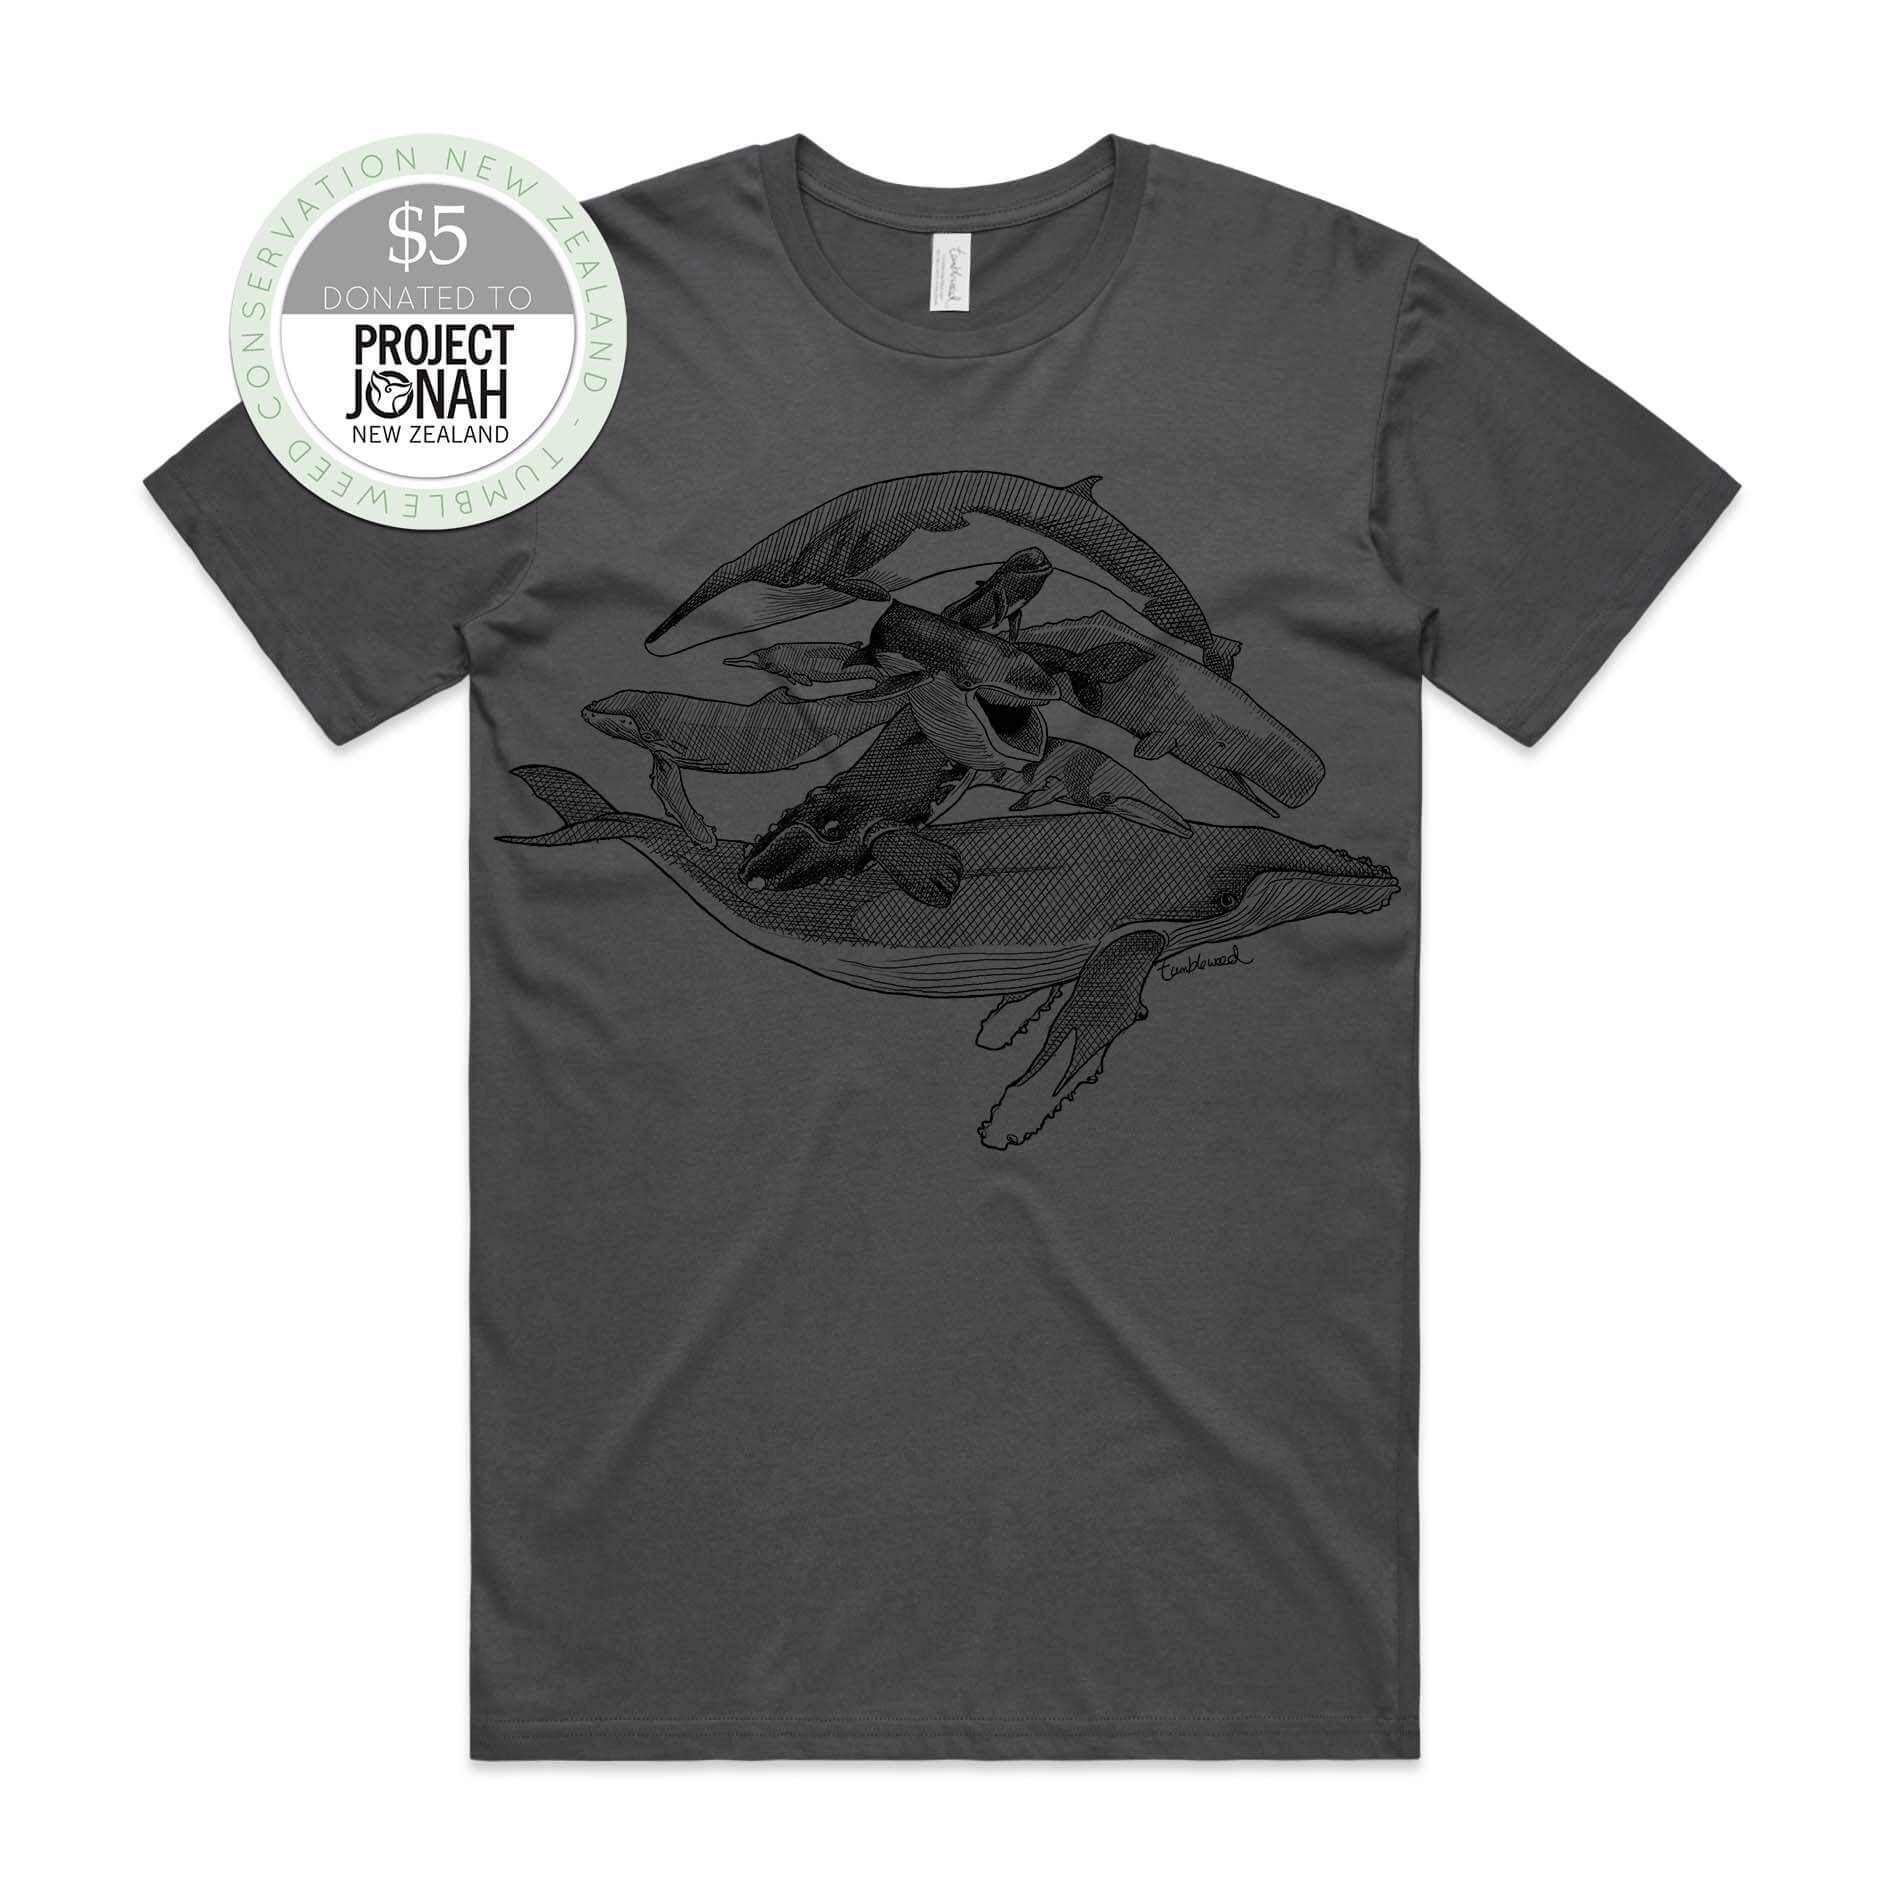 Charcoal, male t-shirt featuring a screen printed Whales design.